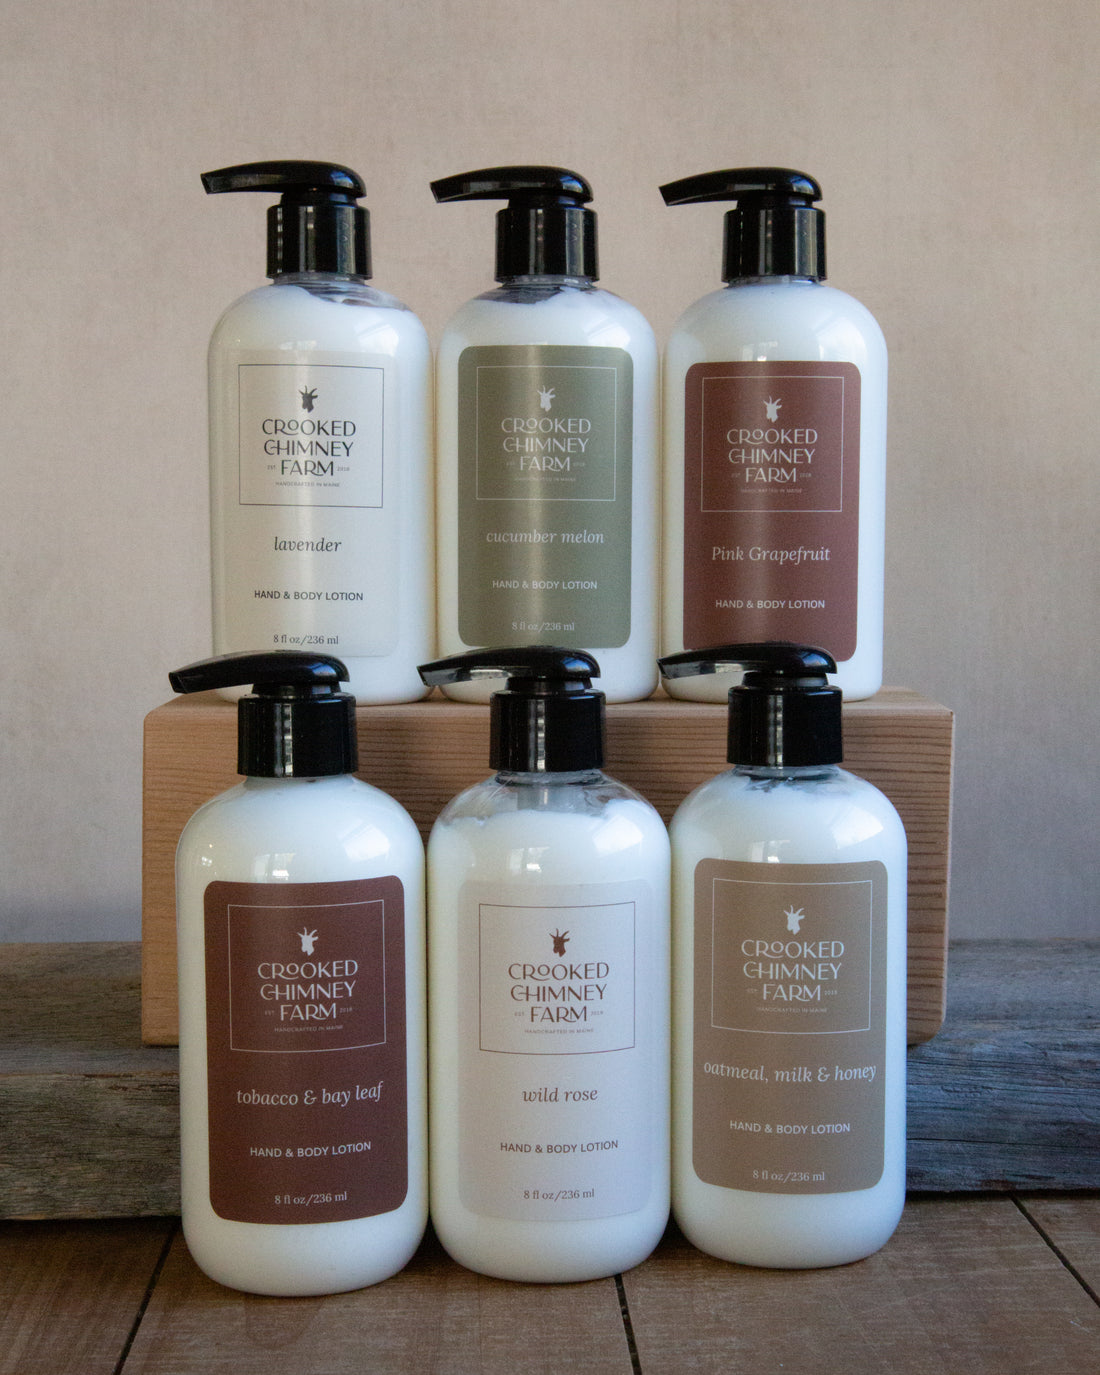 6 8oz bottles of Crooked Chimney Farm Hand and body lotion; lavender, cucumber melon, pink grapefruit, tobacco and bay leaf, wild rose, and oatmeal milk and honey.